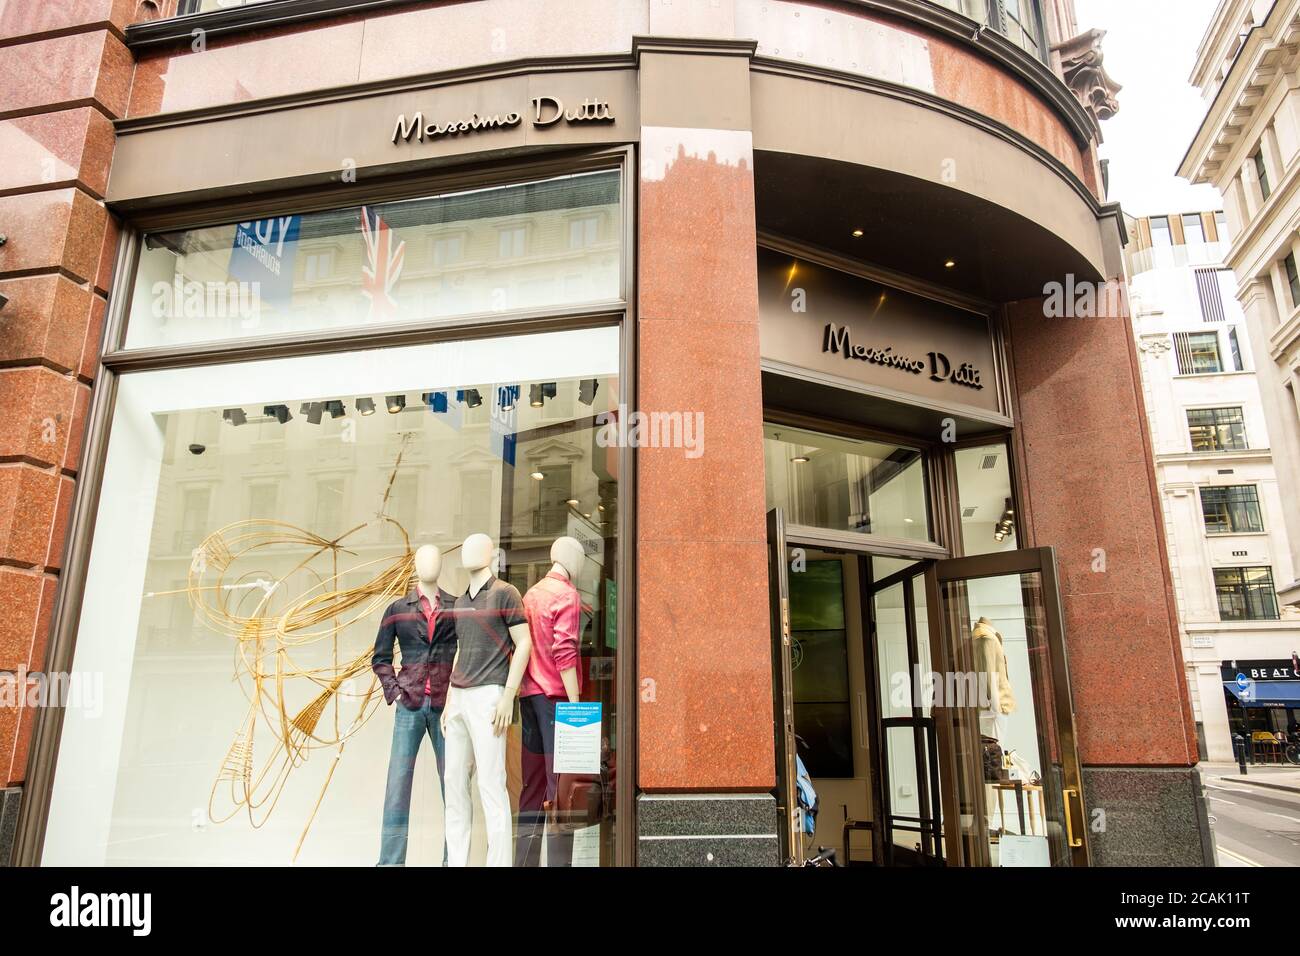 Massimo dutti hi-res stock photography and images - Alamy